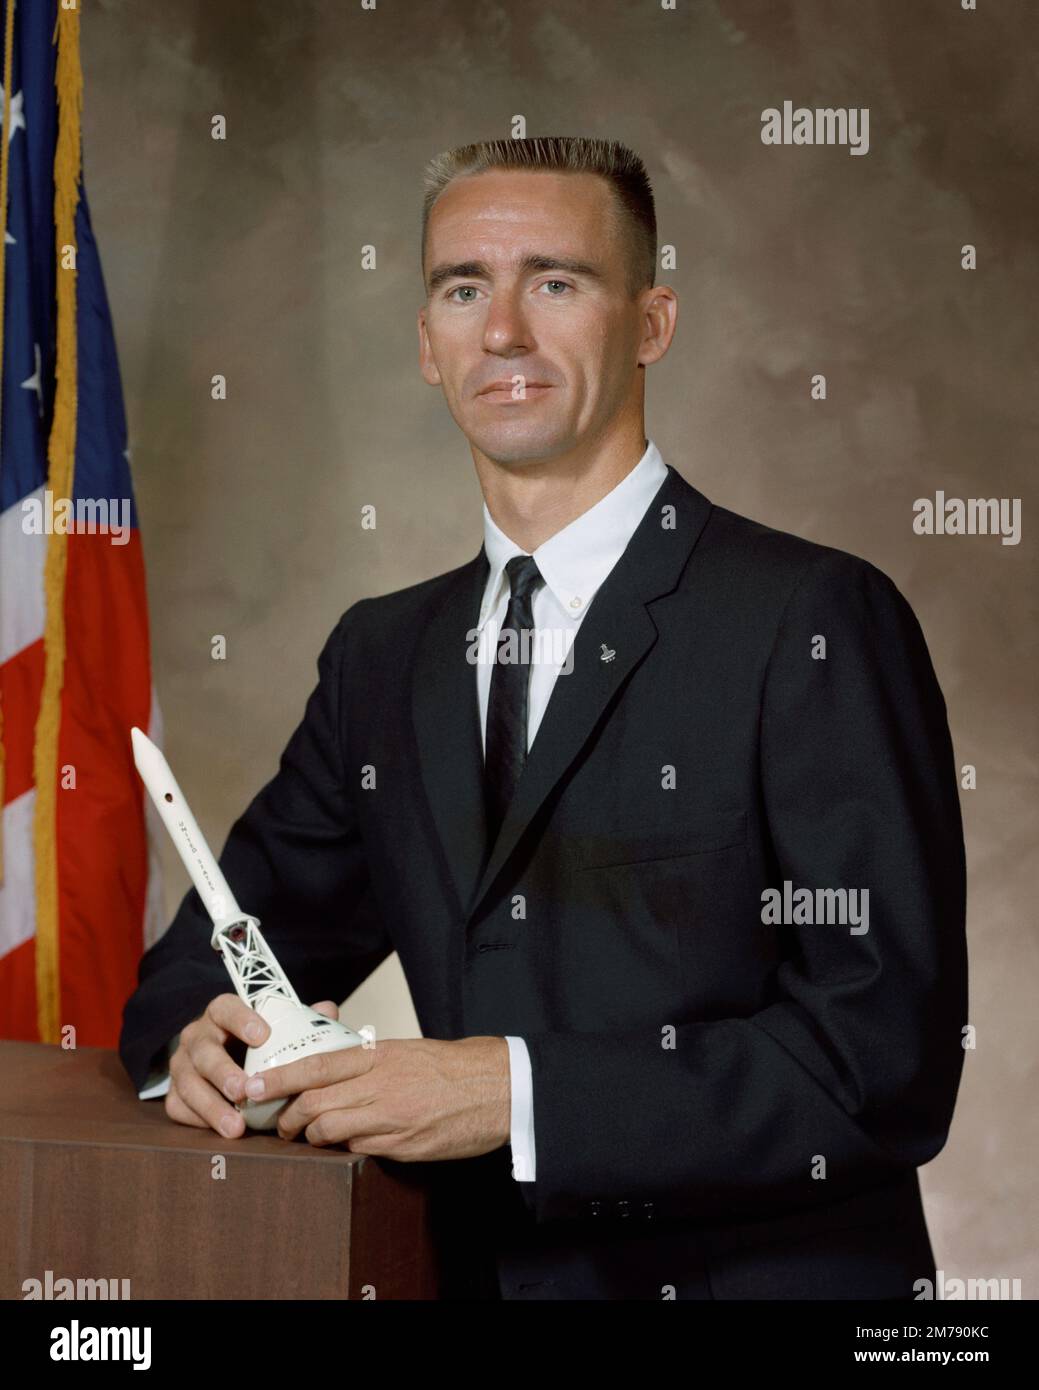 Houston, United States. 10 September, 1964. NASA astronaut Walter Cunningham, lunar module pilot for the Apollo 7 mission poses with a model of the Apollo 7 Saturn rocket ship at the Manned Spacecraft Center,  September 10, 1964 in Houston, Texas. Cunningham died January 4, 2023 at 90-years-old, the last surviving member of the NASA Apollo 7 mission. Stock Photo